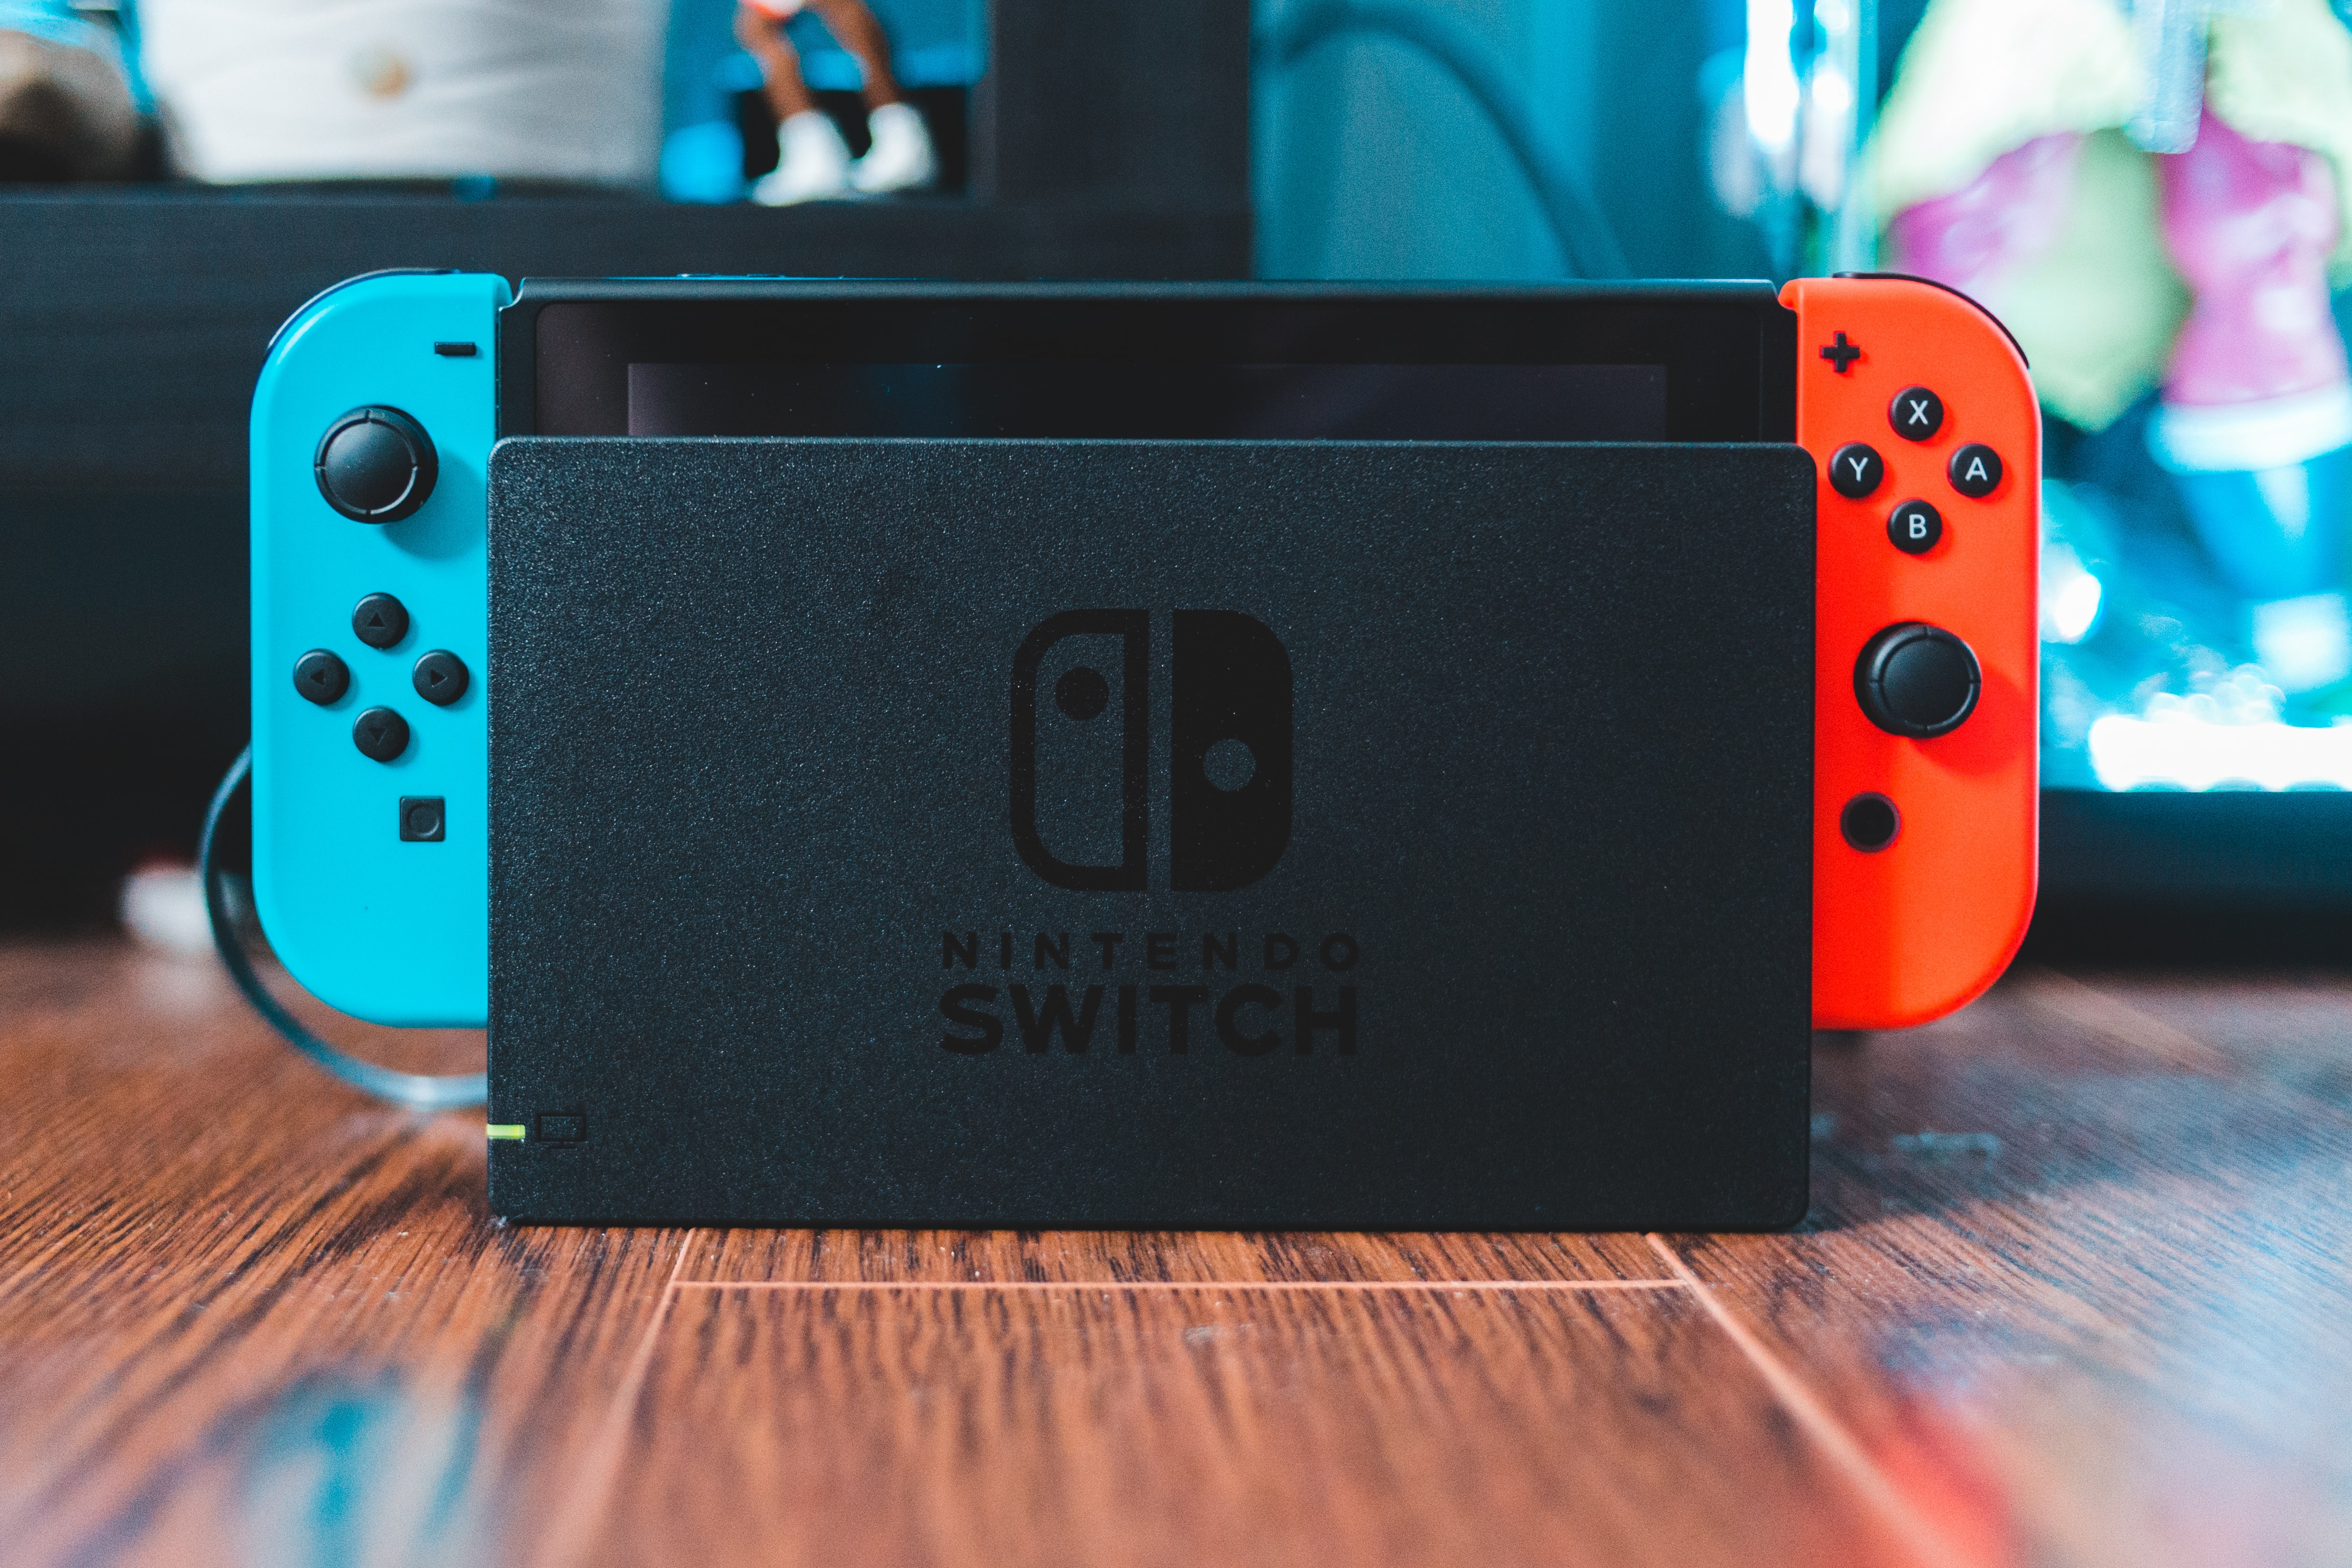 Nintendo Switch 2 name, release date and pricing reportedly revealed